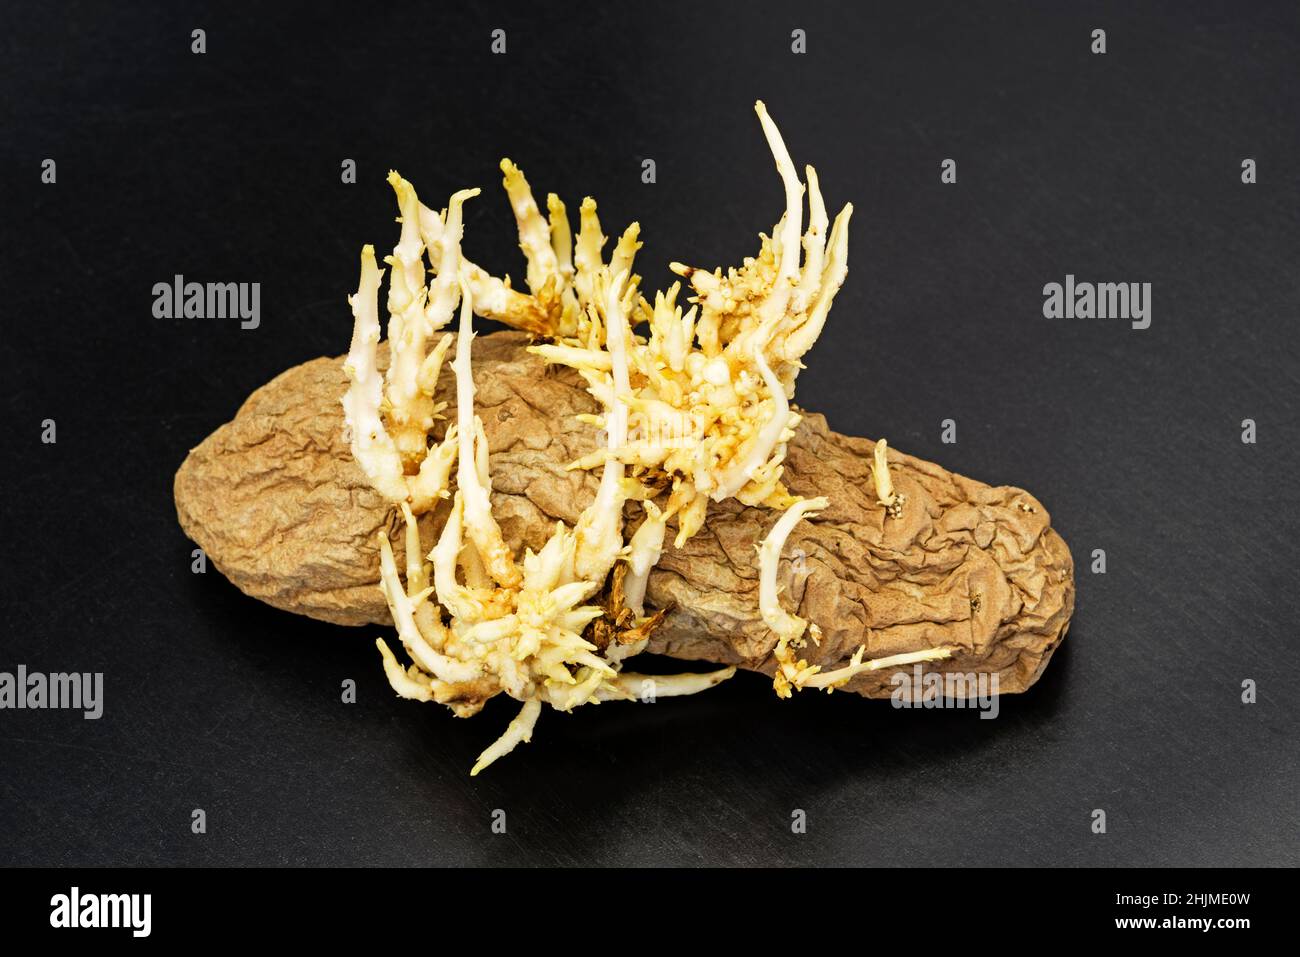 wrinkled old sprouting potato on a black table Stock Photo